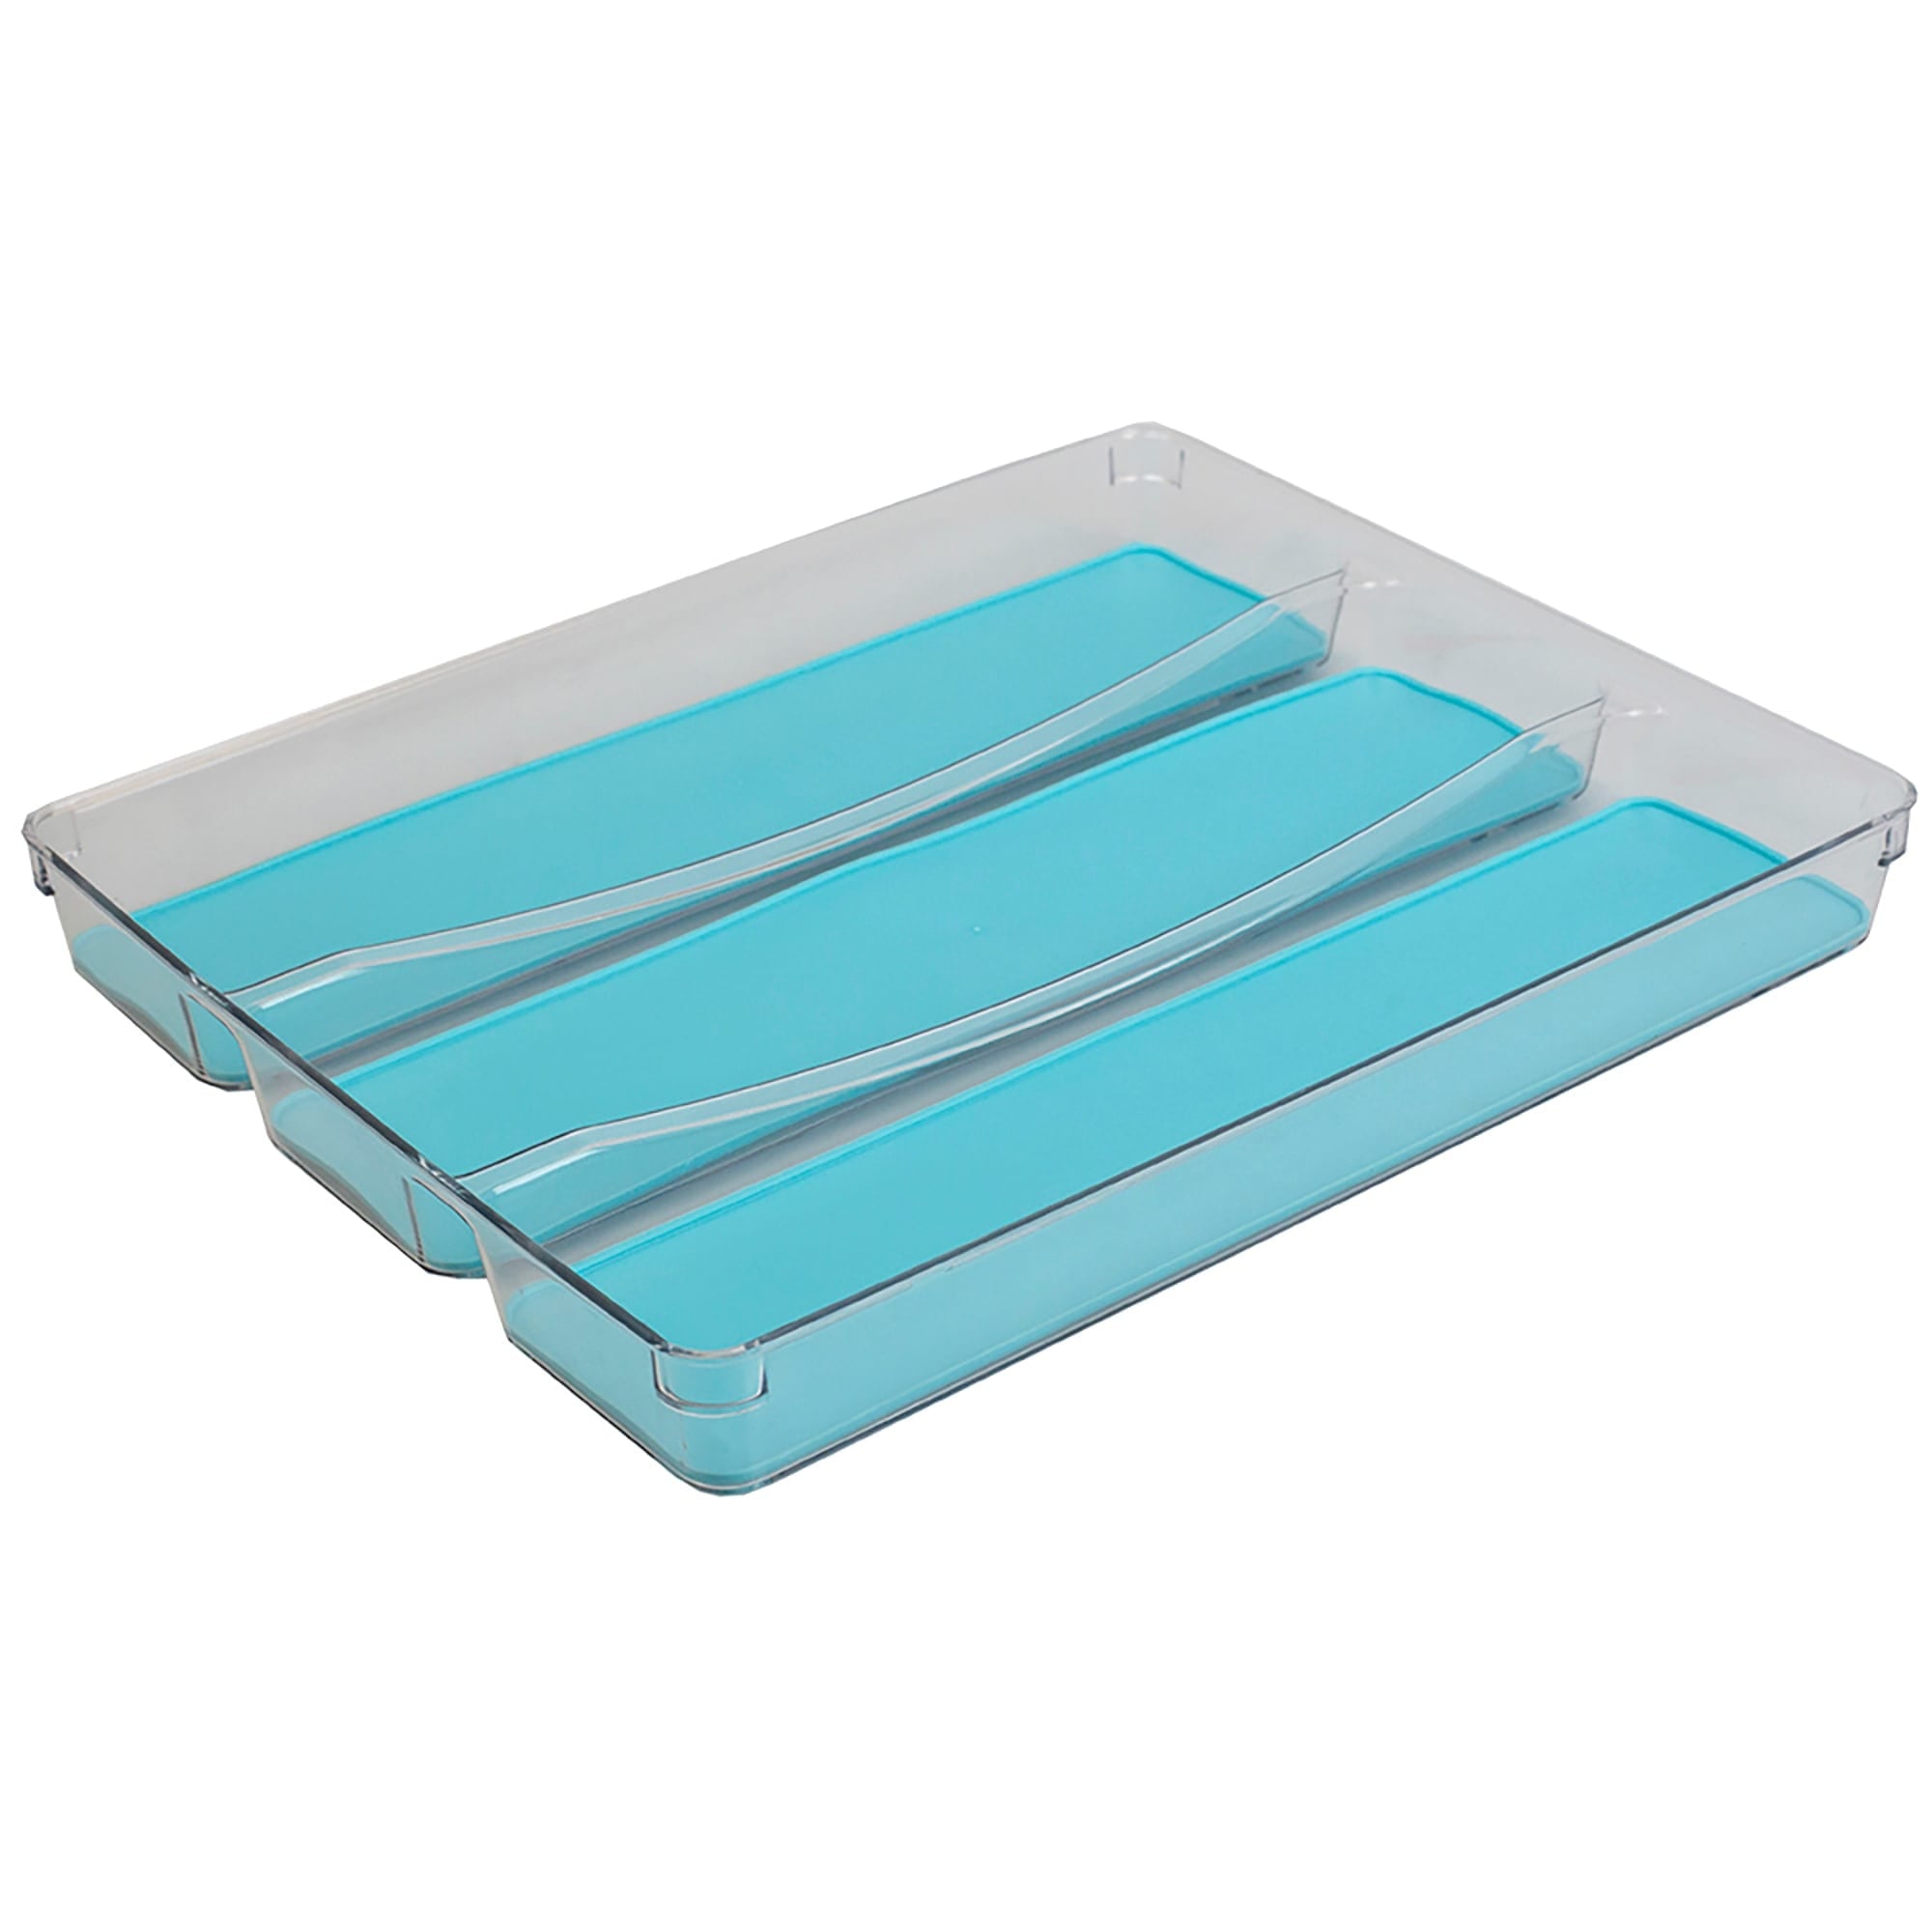 Home Basics Plastic Cutlery Tray with Rubber-Lined Compartments, Turquoise $10 EACH, CASE PACK OF 12